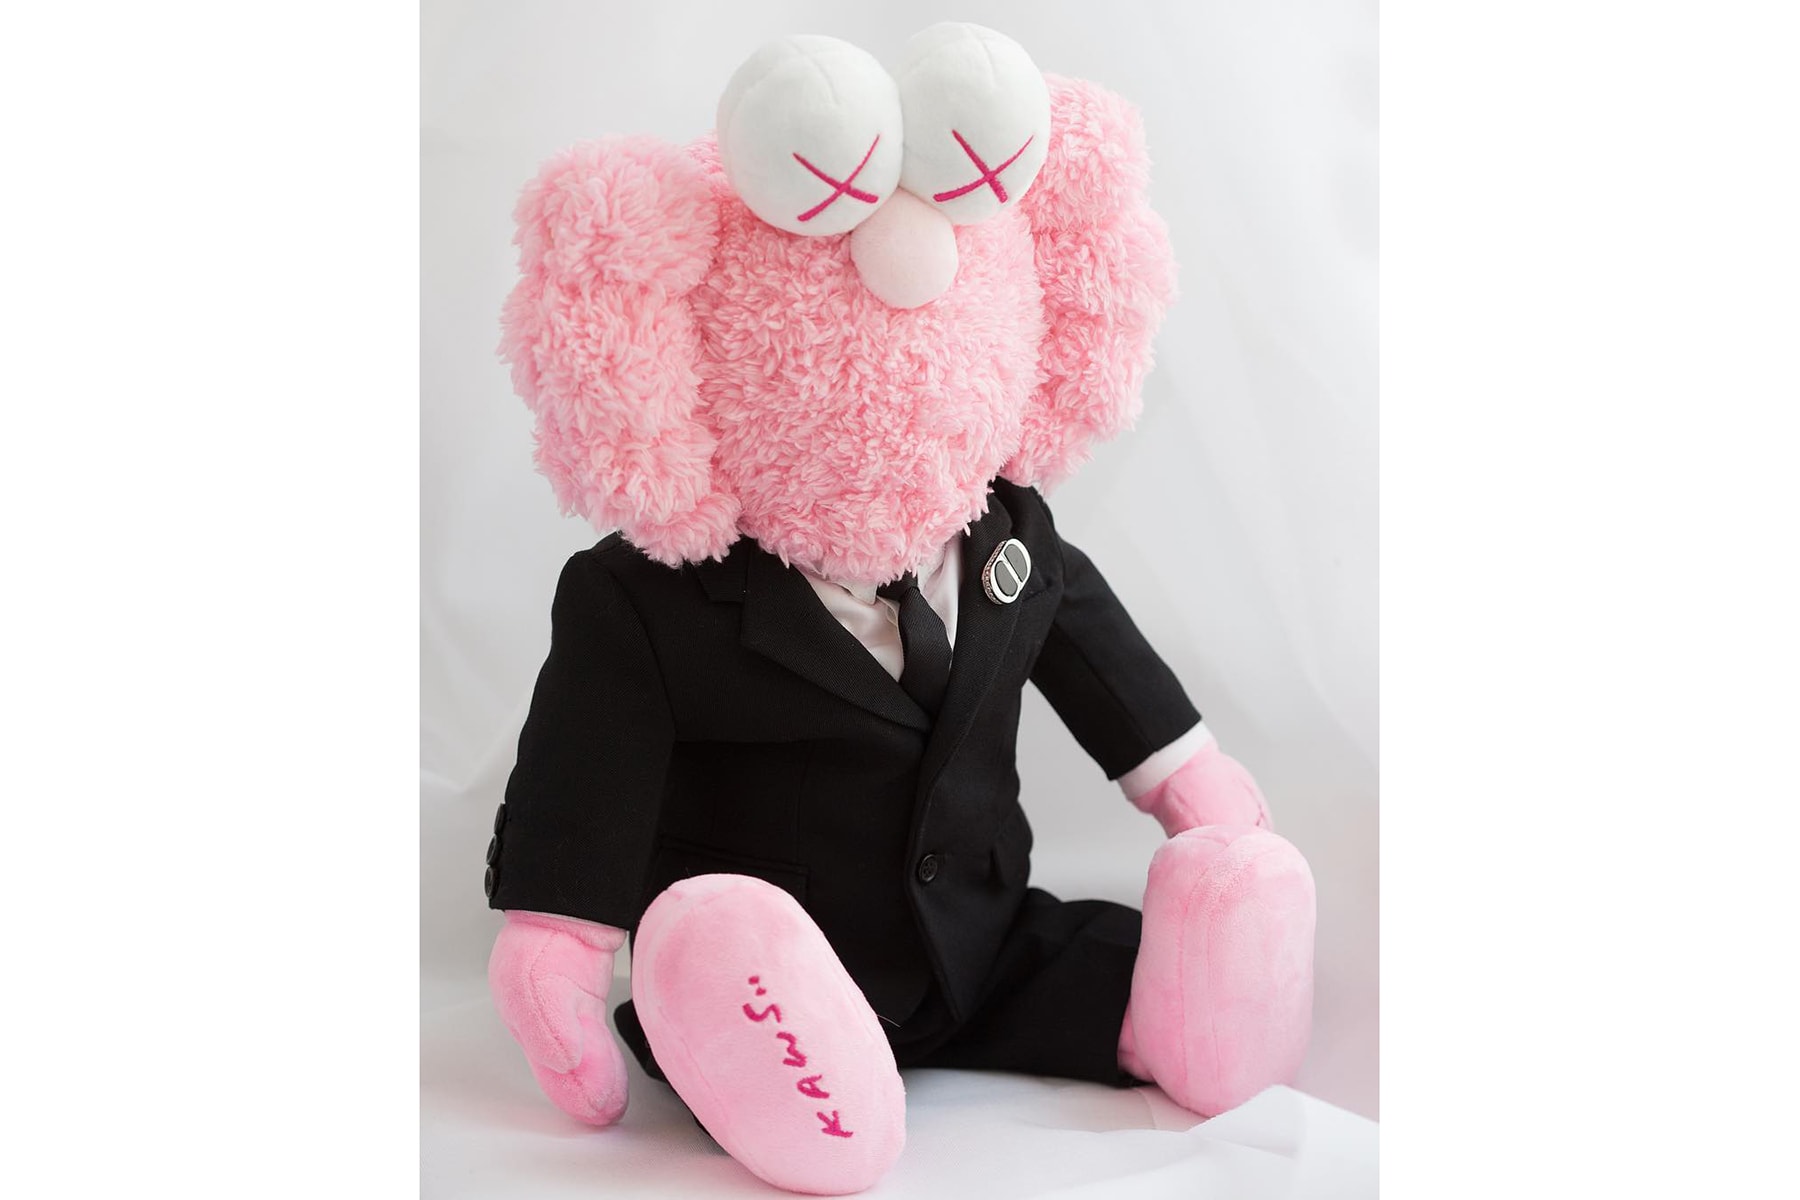 You can now own a Dior x KAWS plush toy – for $10 million